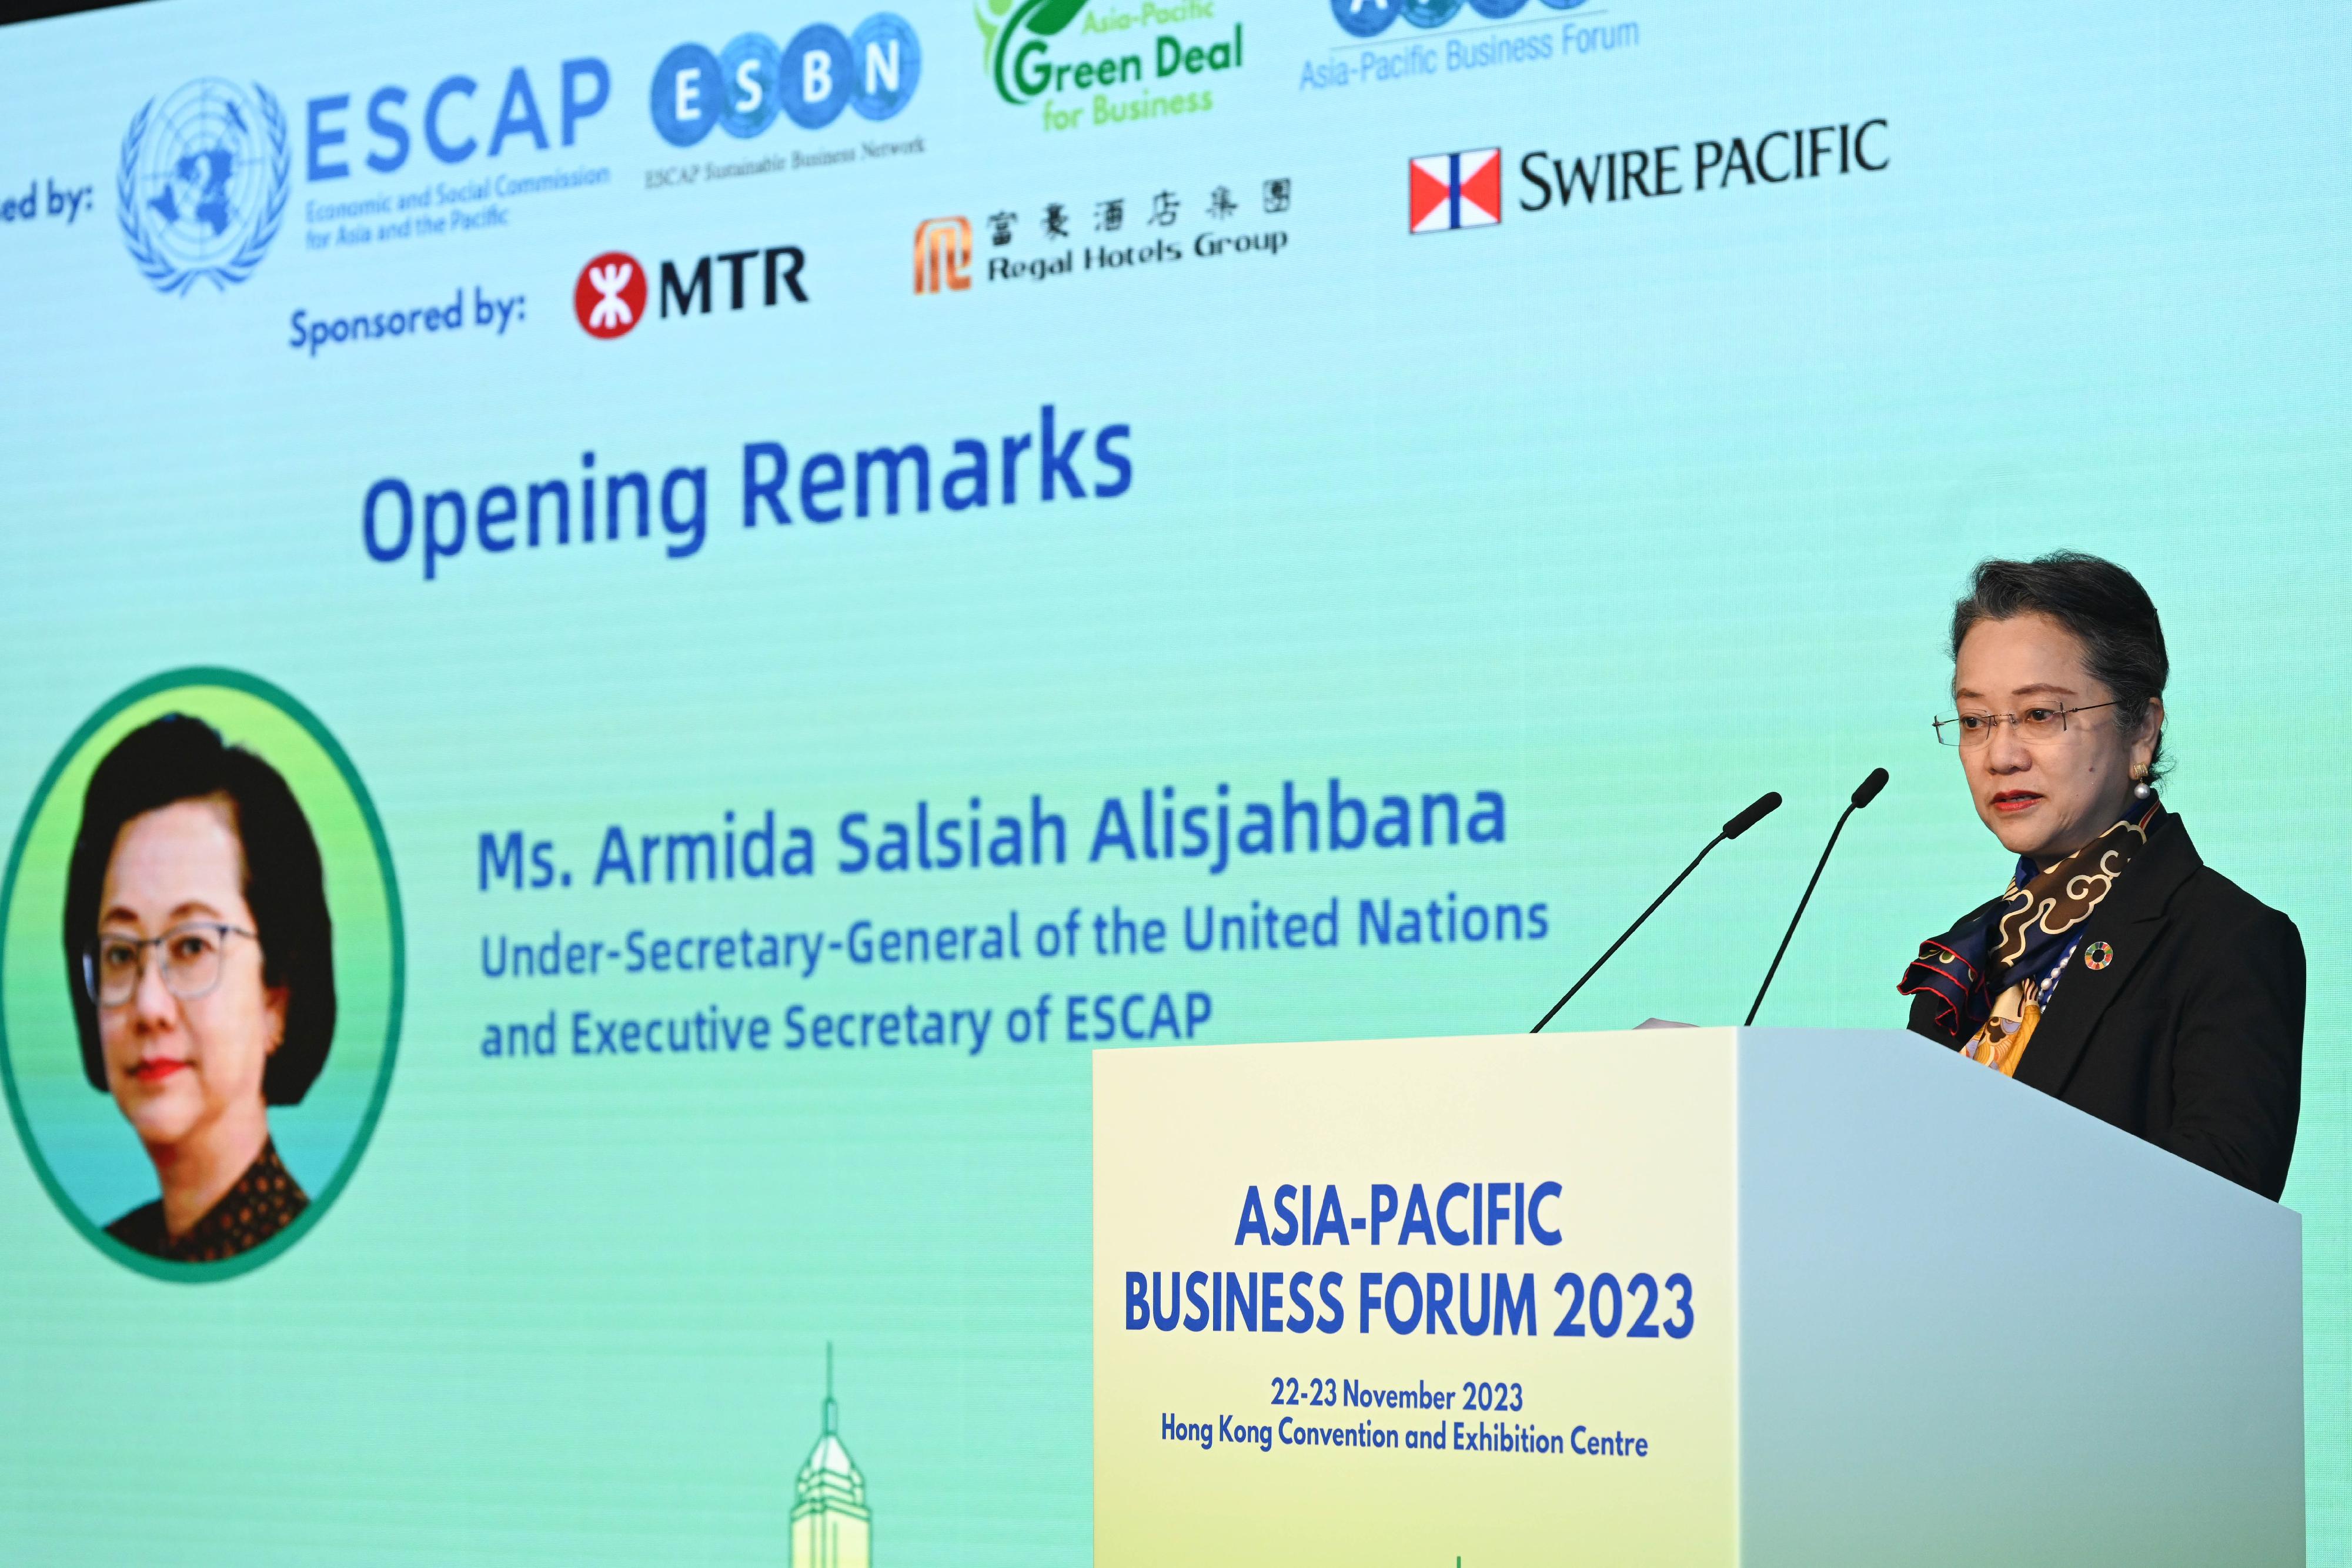 The Under-Secretary-General of the United Nations and Executive Secretary of the United Nations Economic and Social Commission for Asia and the Pacific, Ms Armida Salsiah Alisjahbana, gives opening remarks at the inaugural session of the Asia-Pacific Business Forum 2023 this morning (November 22). 